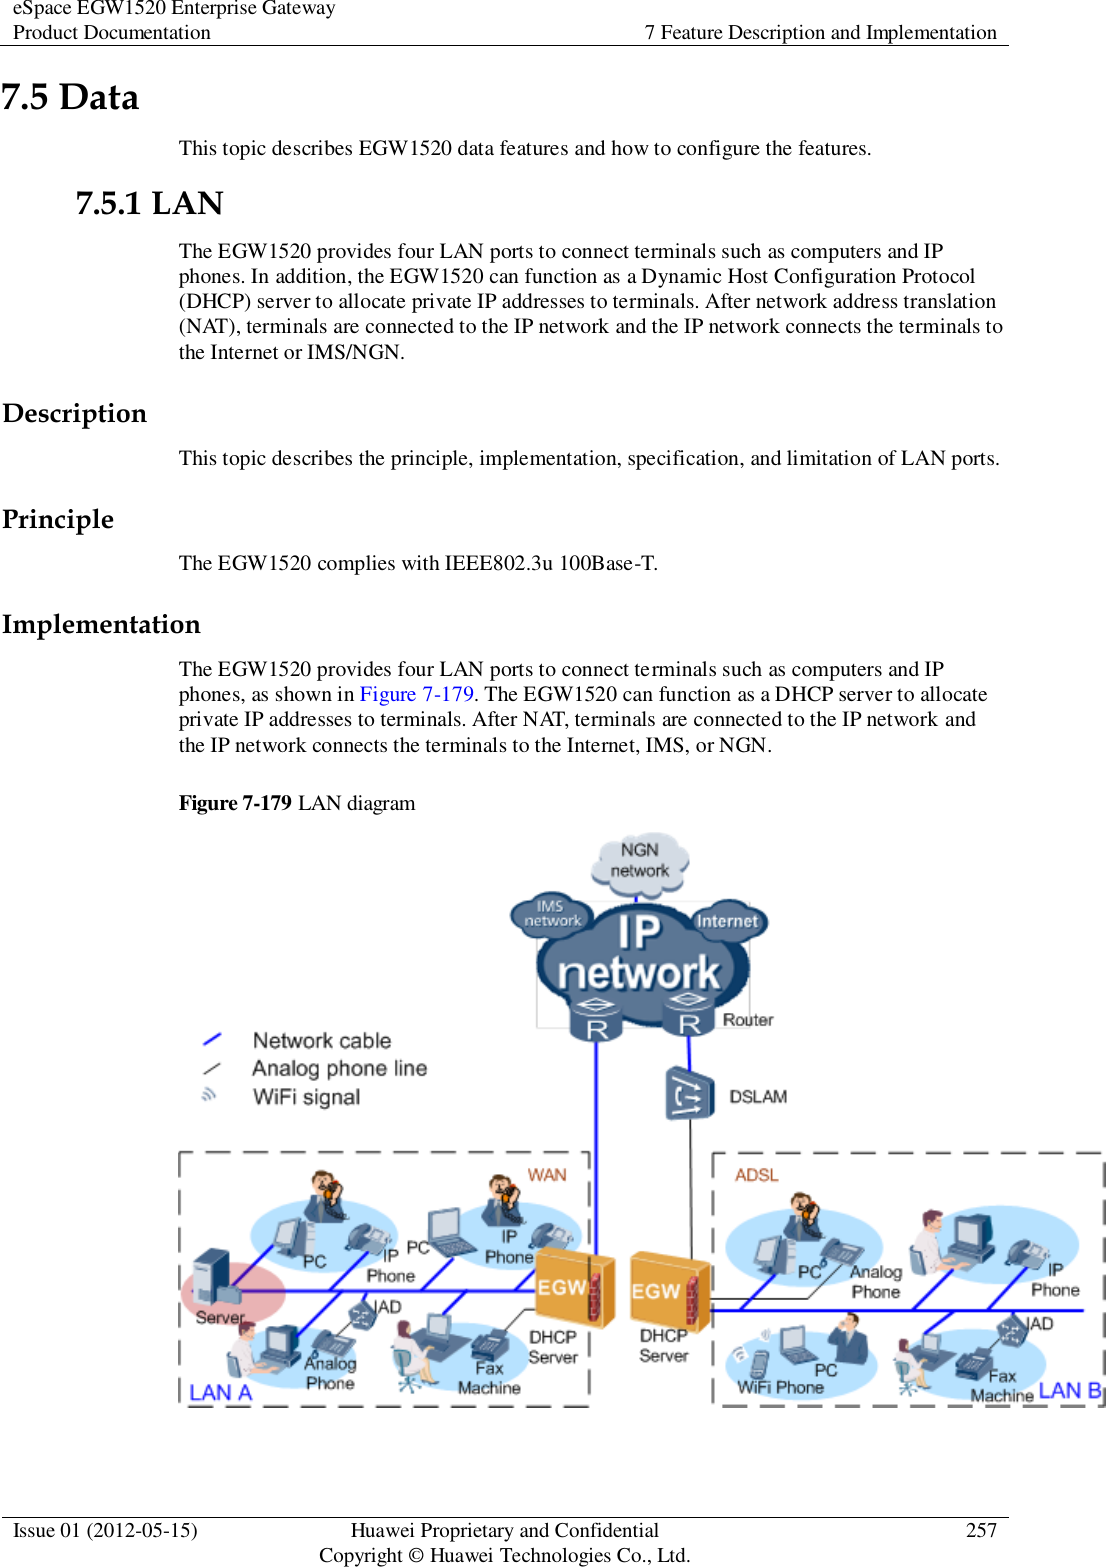 eSpace EGW1520 Enterprise Gateway Product Documentation 7 Feature Description and Implementation  Issue 01 (2012-05-15) Huawei Proprietary and Confidential                                     Copyright © Huawei Technologies Co., Ltd. 257  7.5 Data This topic describes EGW1520 data features and how to configure the features. 7.5.1 LAN The EGW1520 provides four LAN ports to connect terminals such as computers and IP phones. In addition, the EGW1520 can function as a Dynamic Host Configuration Protocol (DHCP) server to allocate private IP addresses to terminals. After network address translation (NAT), terminals are connected to the IP network and the IP network connects the terminals to the Internet or IMS/NGN. Description This topic describes the principle, implementation, specification, and limitation of LAN ports. Principle The EGW1520 complies with IEEE802.3u 100Base-T. Implementation The EGW1520 provides four LAN ports to connect terminals such as computers and IP phones, as shown in Figure 7-179. The EGW1520 can function as a DHCP server to allocate private IP addresses to terminals. After NAT, terminals are connected to the IP network and the IP network connects the terminals to the Internet, IMS, or NGN. Figure 7-179 LAN diagram   